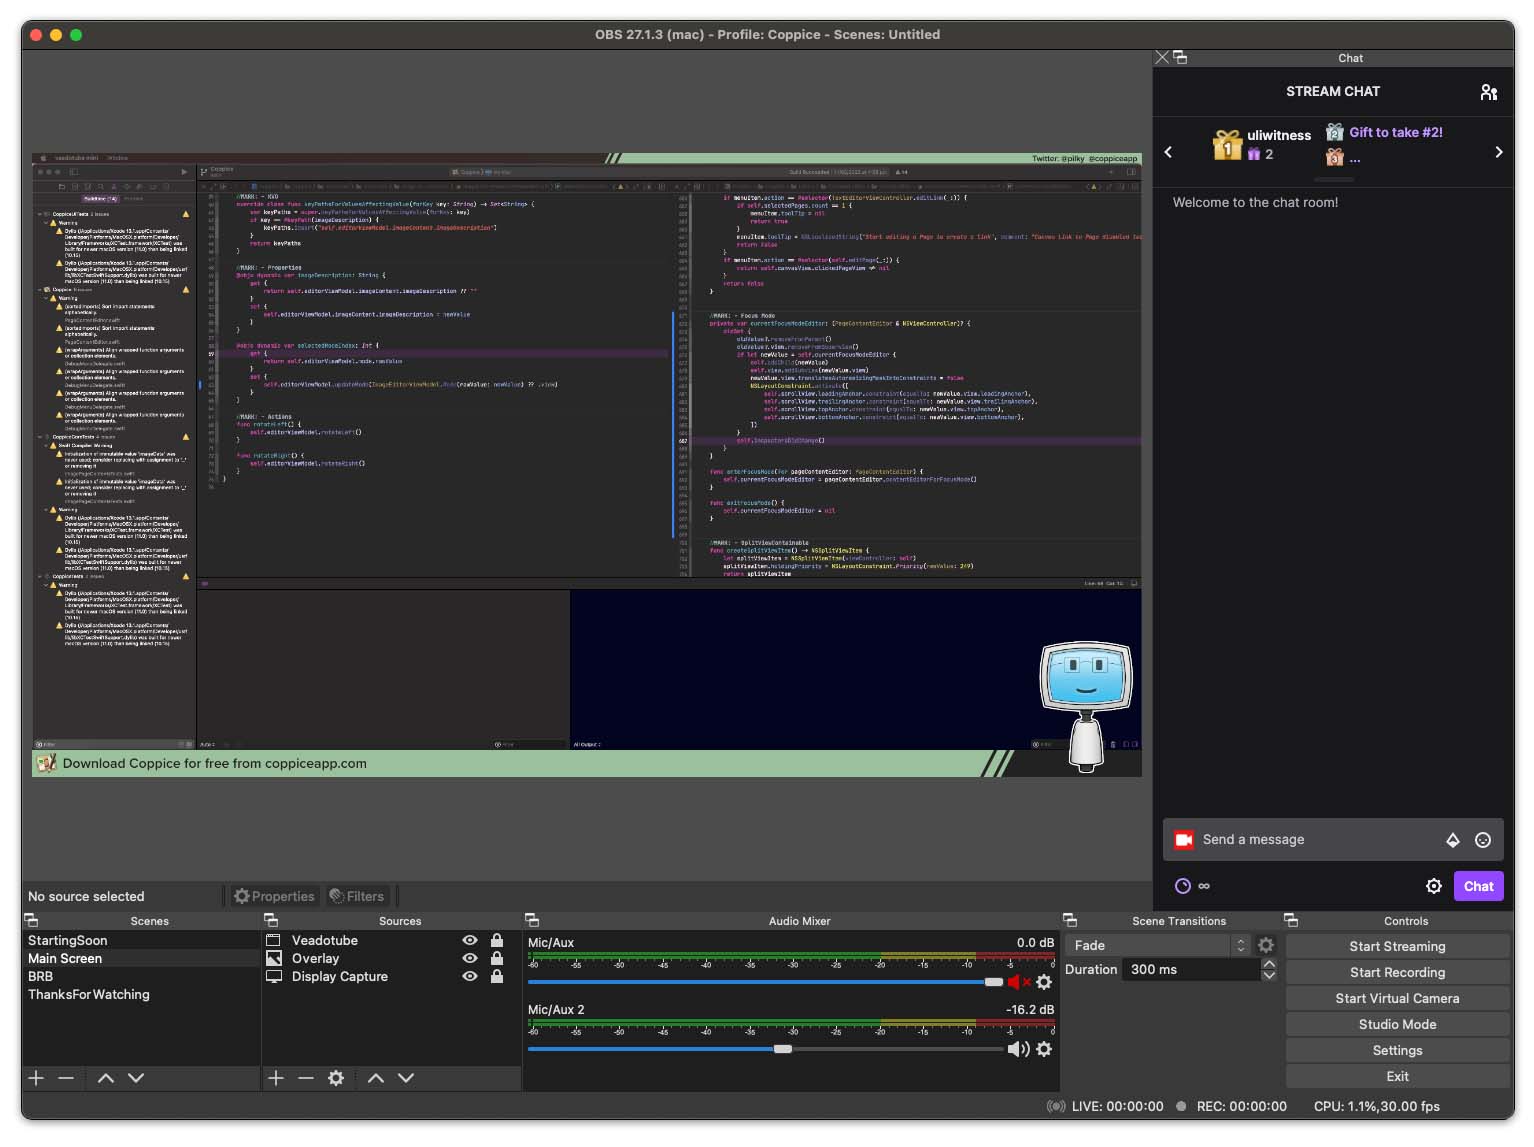 Screenshot of OBS. The top left is a preview of the screen. On the right is a Twitch chat. On the bottom are areas for Scenes, Sources, Audio, and Controls